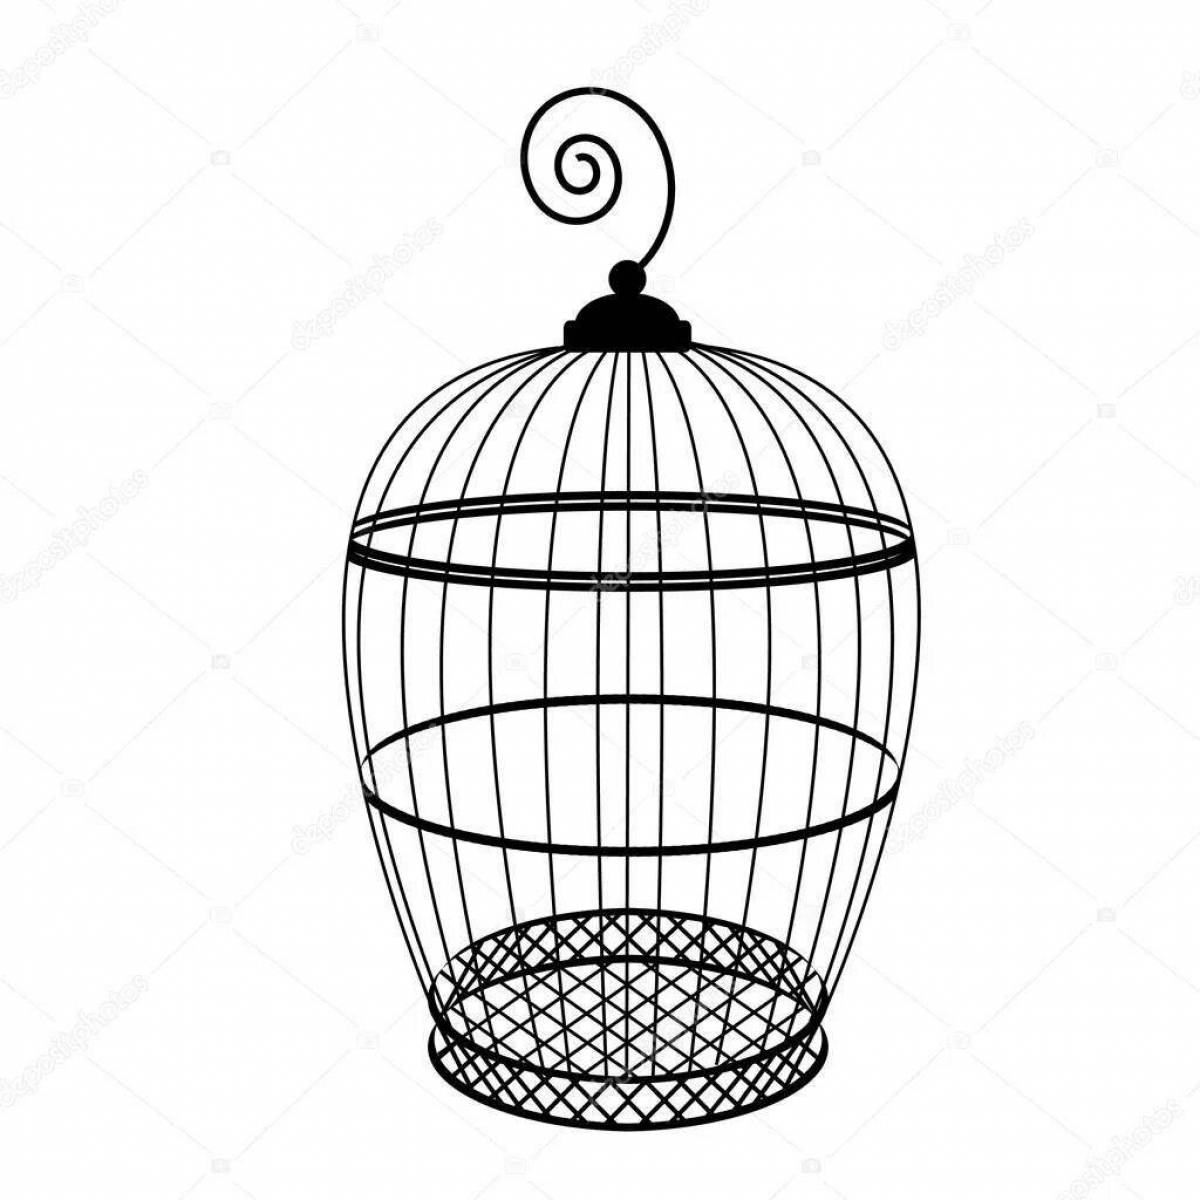 Exciting cage coloring page for kids